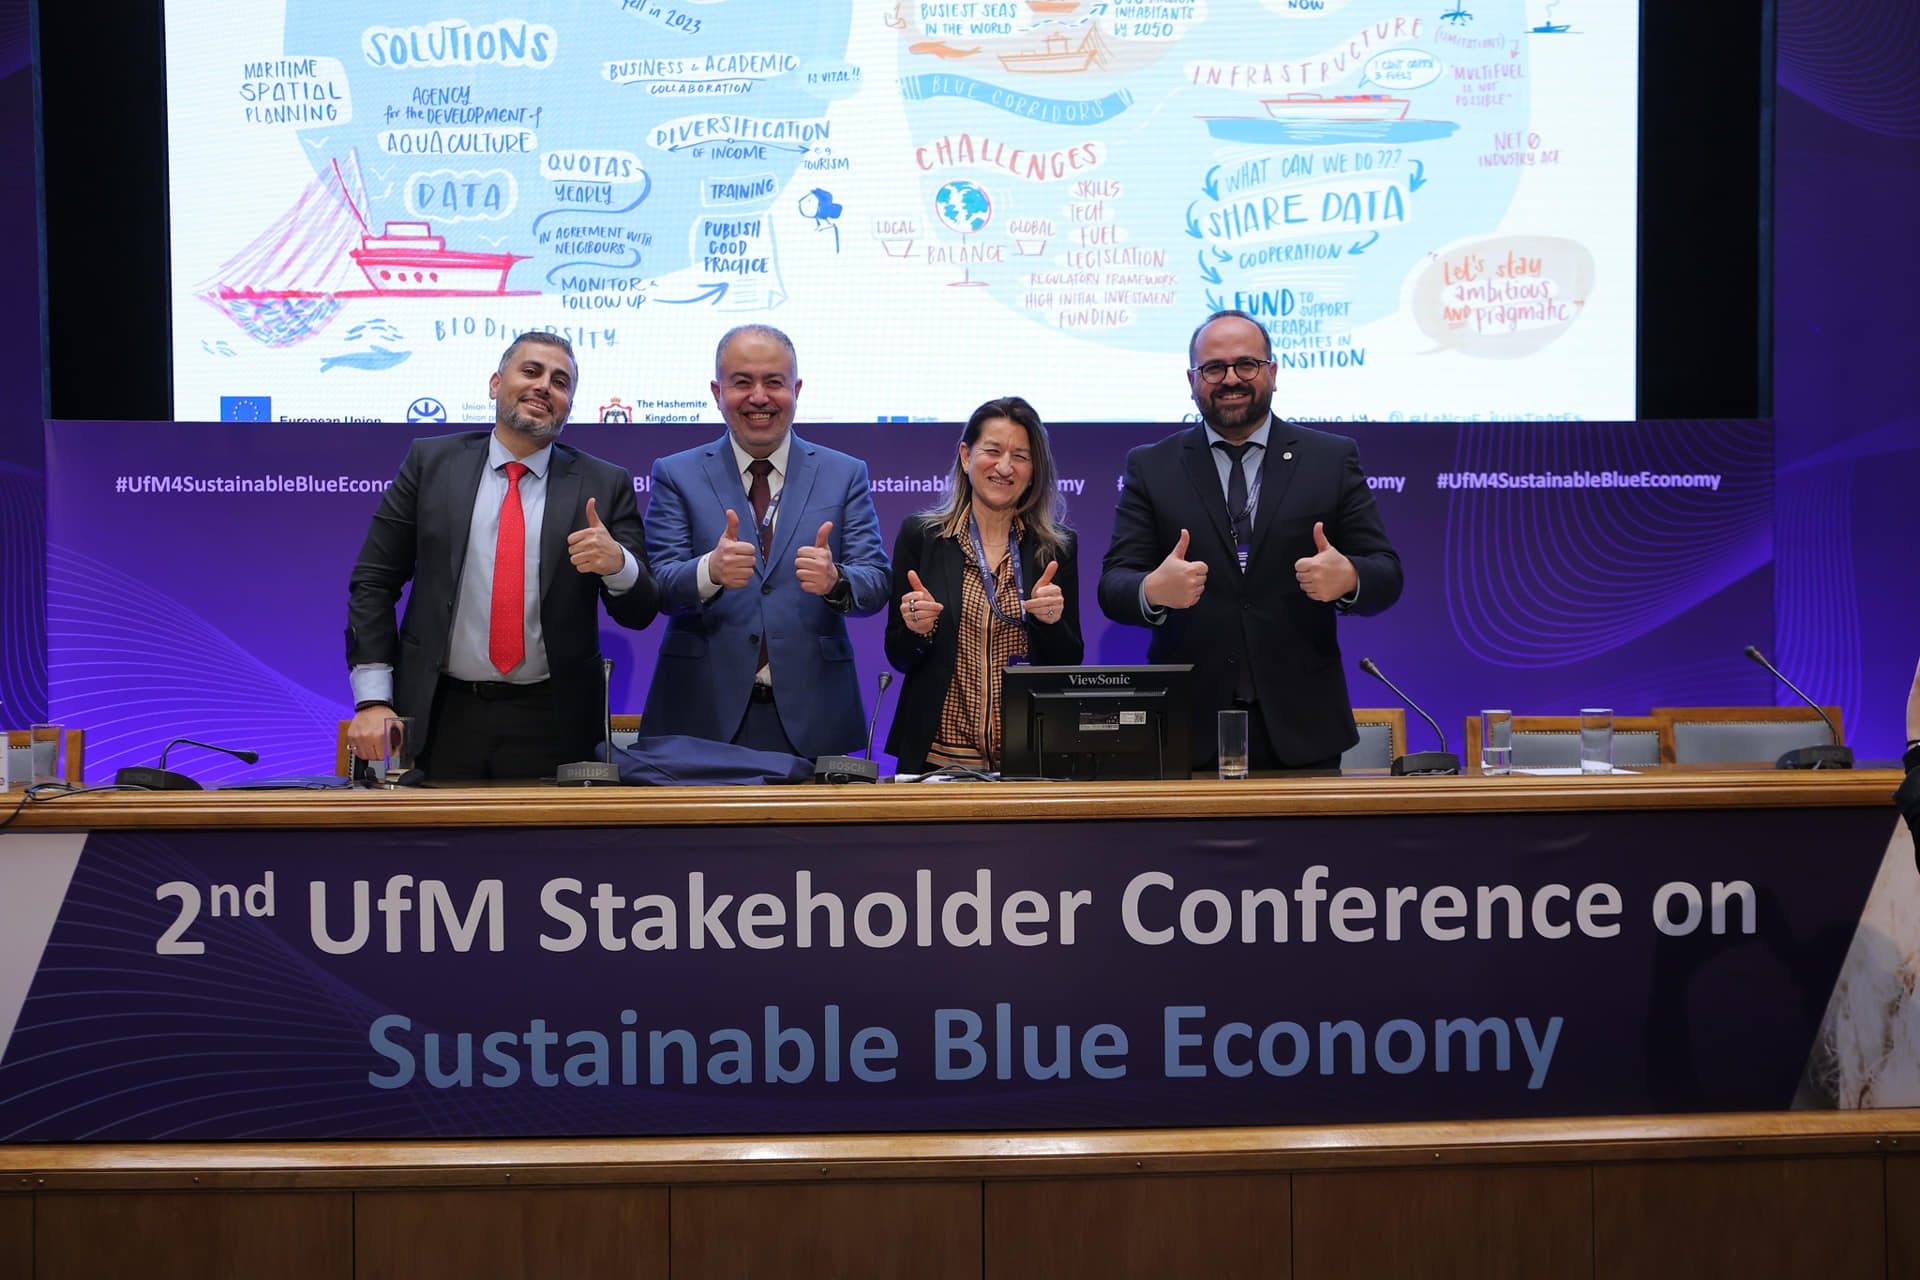 UfM stakeholder Conference - speakers with thumbs up